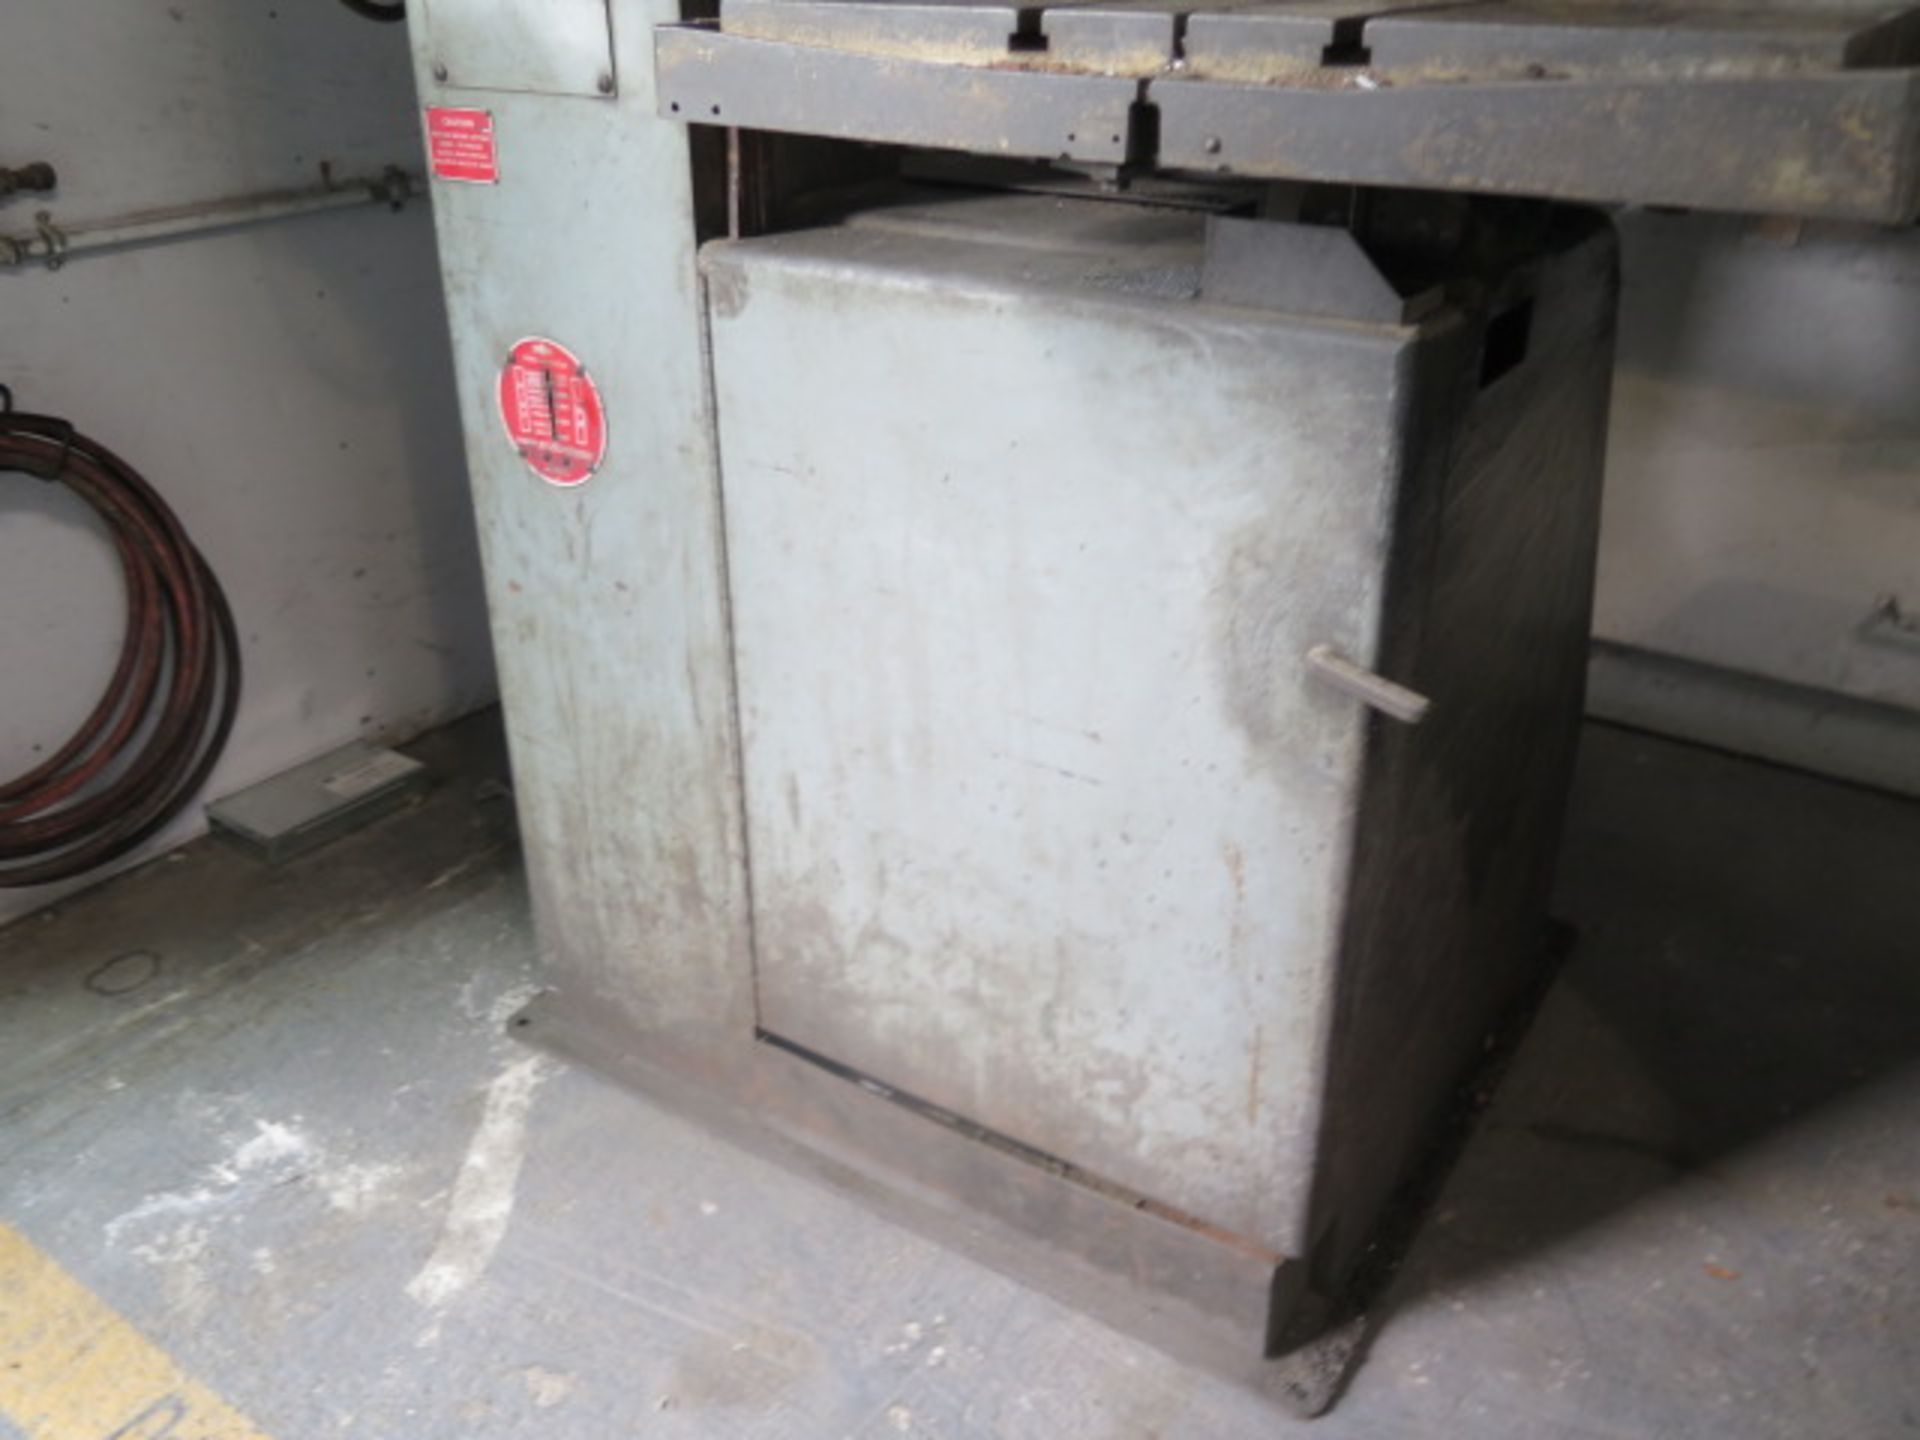 DoAll 2012-1A 20” Vertical Band Saw s/n 340-78413 w/ Blade Welder, 50-5200 FPM, SOLD AS IS - Image 5 of 8